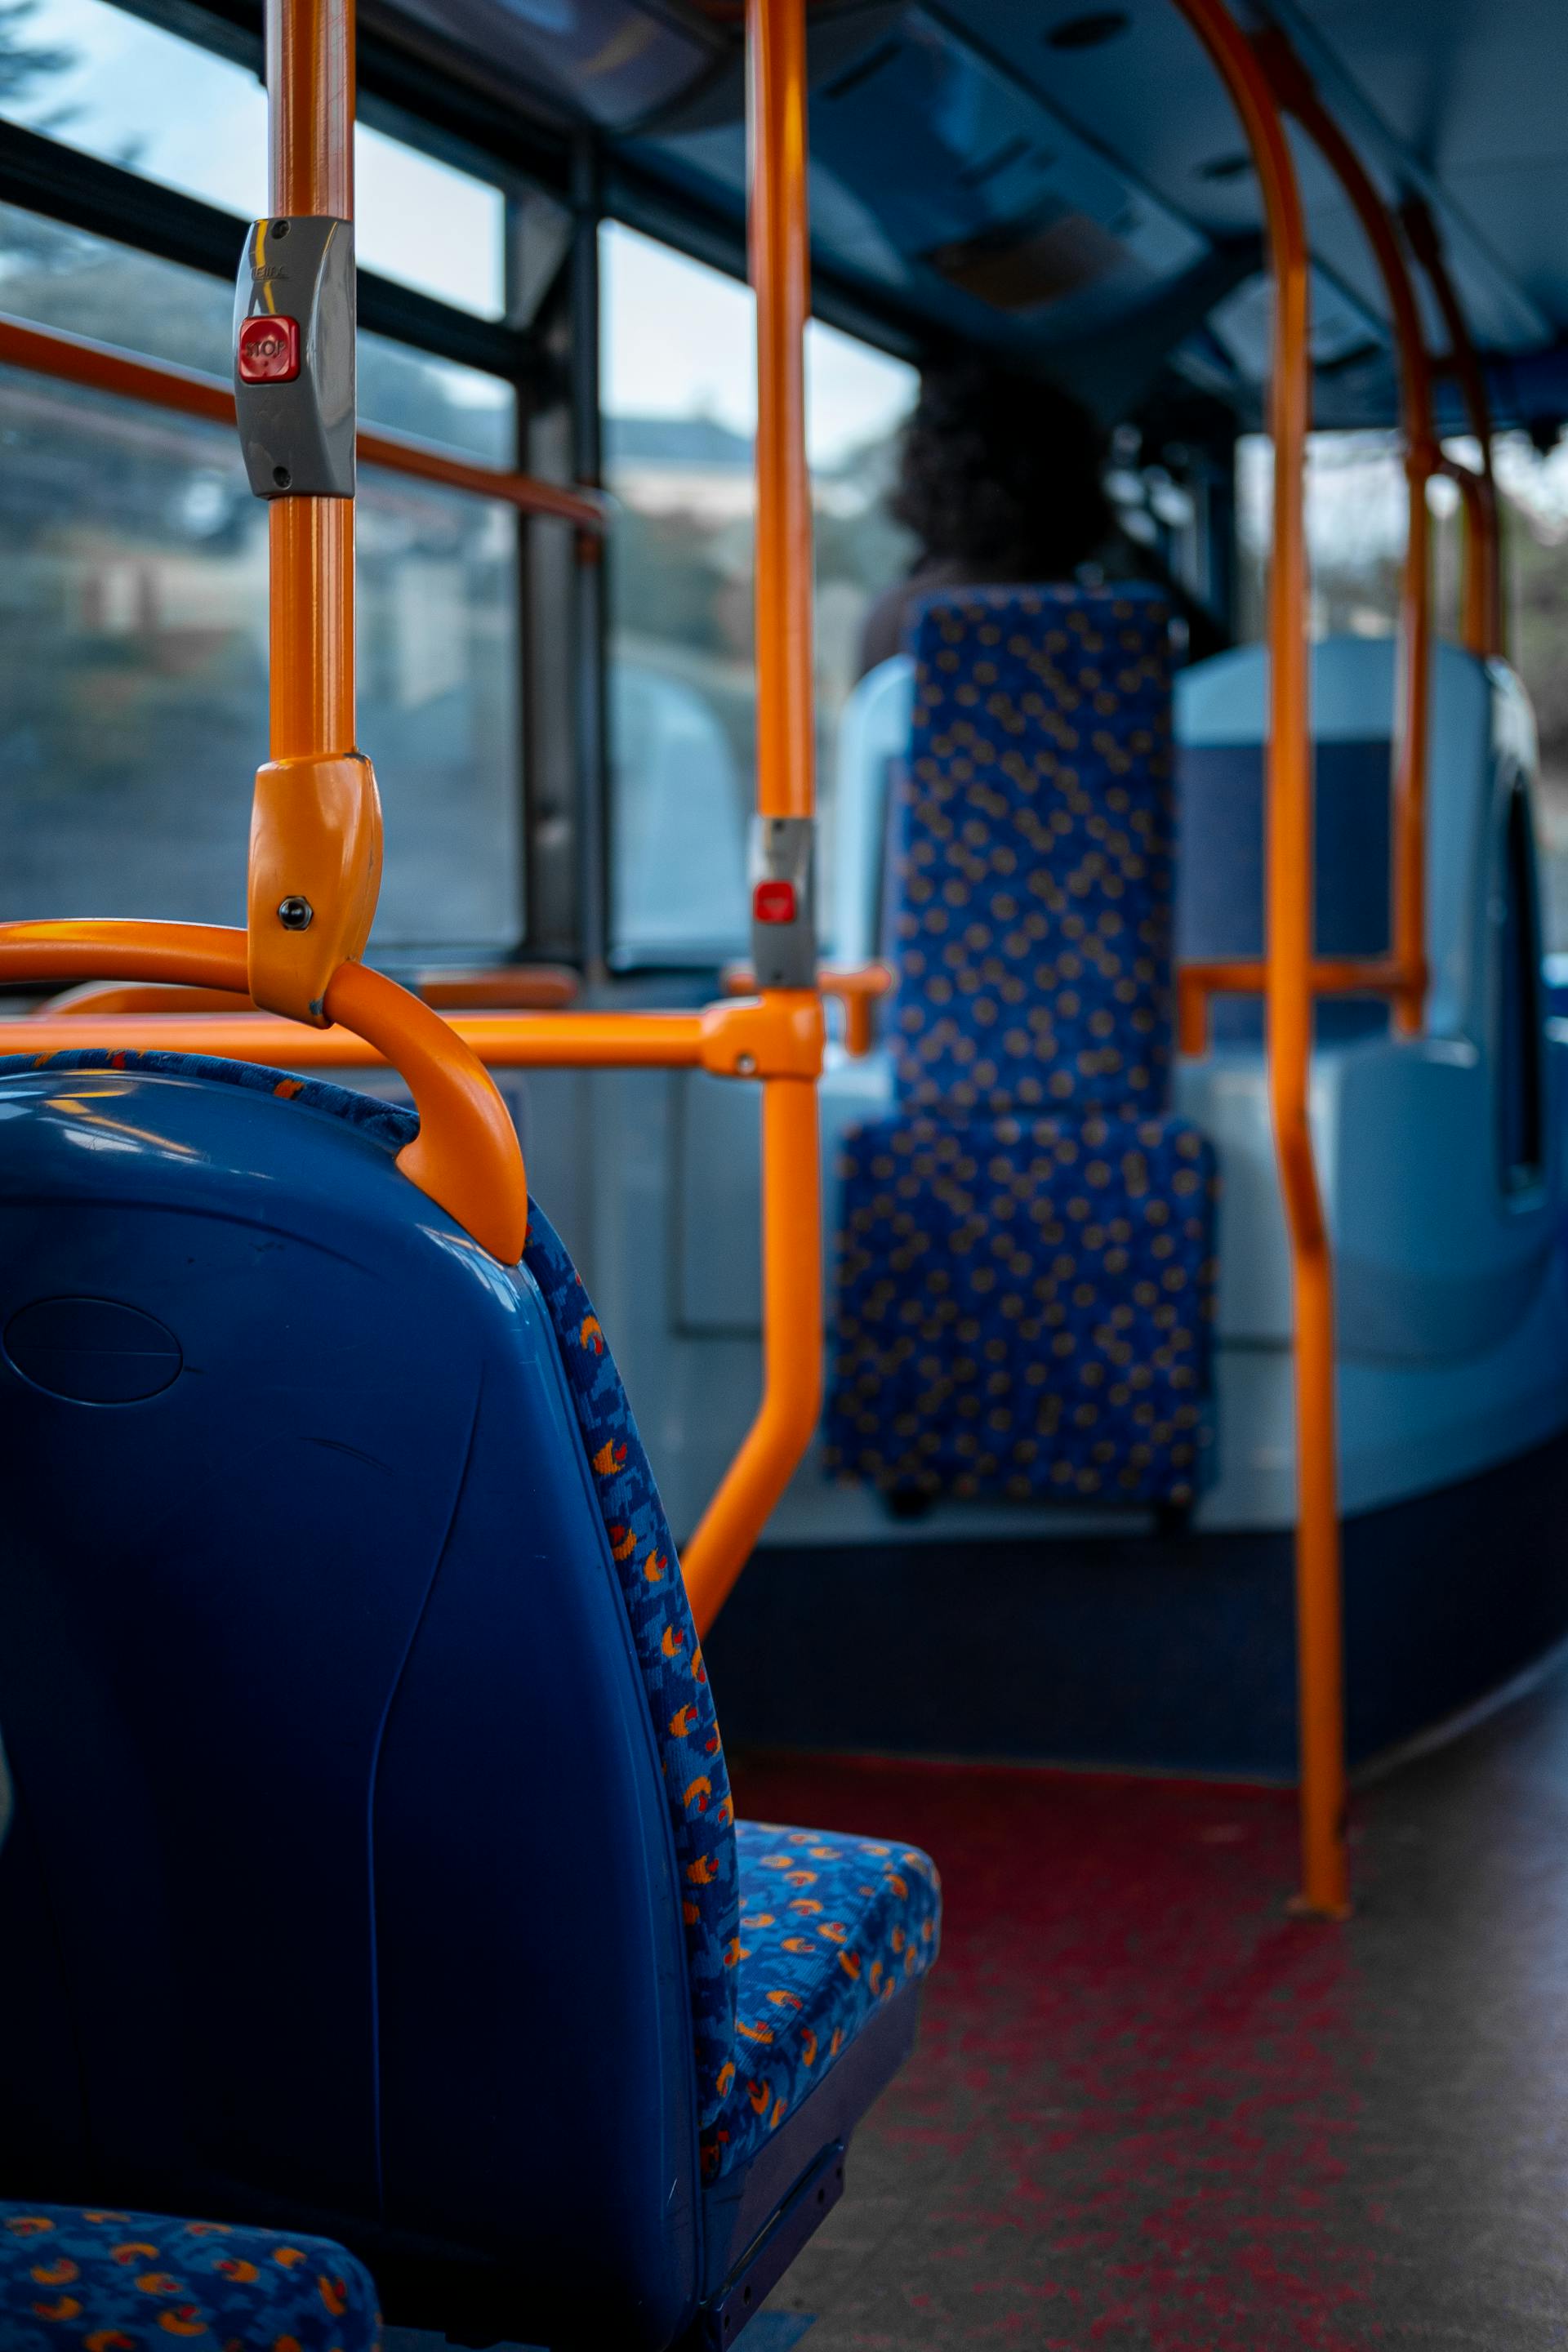 Seats in a bus | Source: Pexels